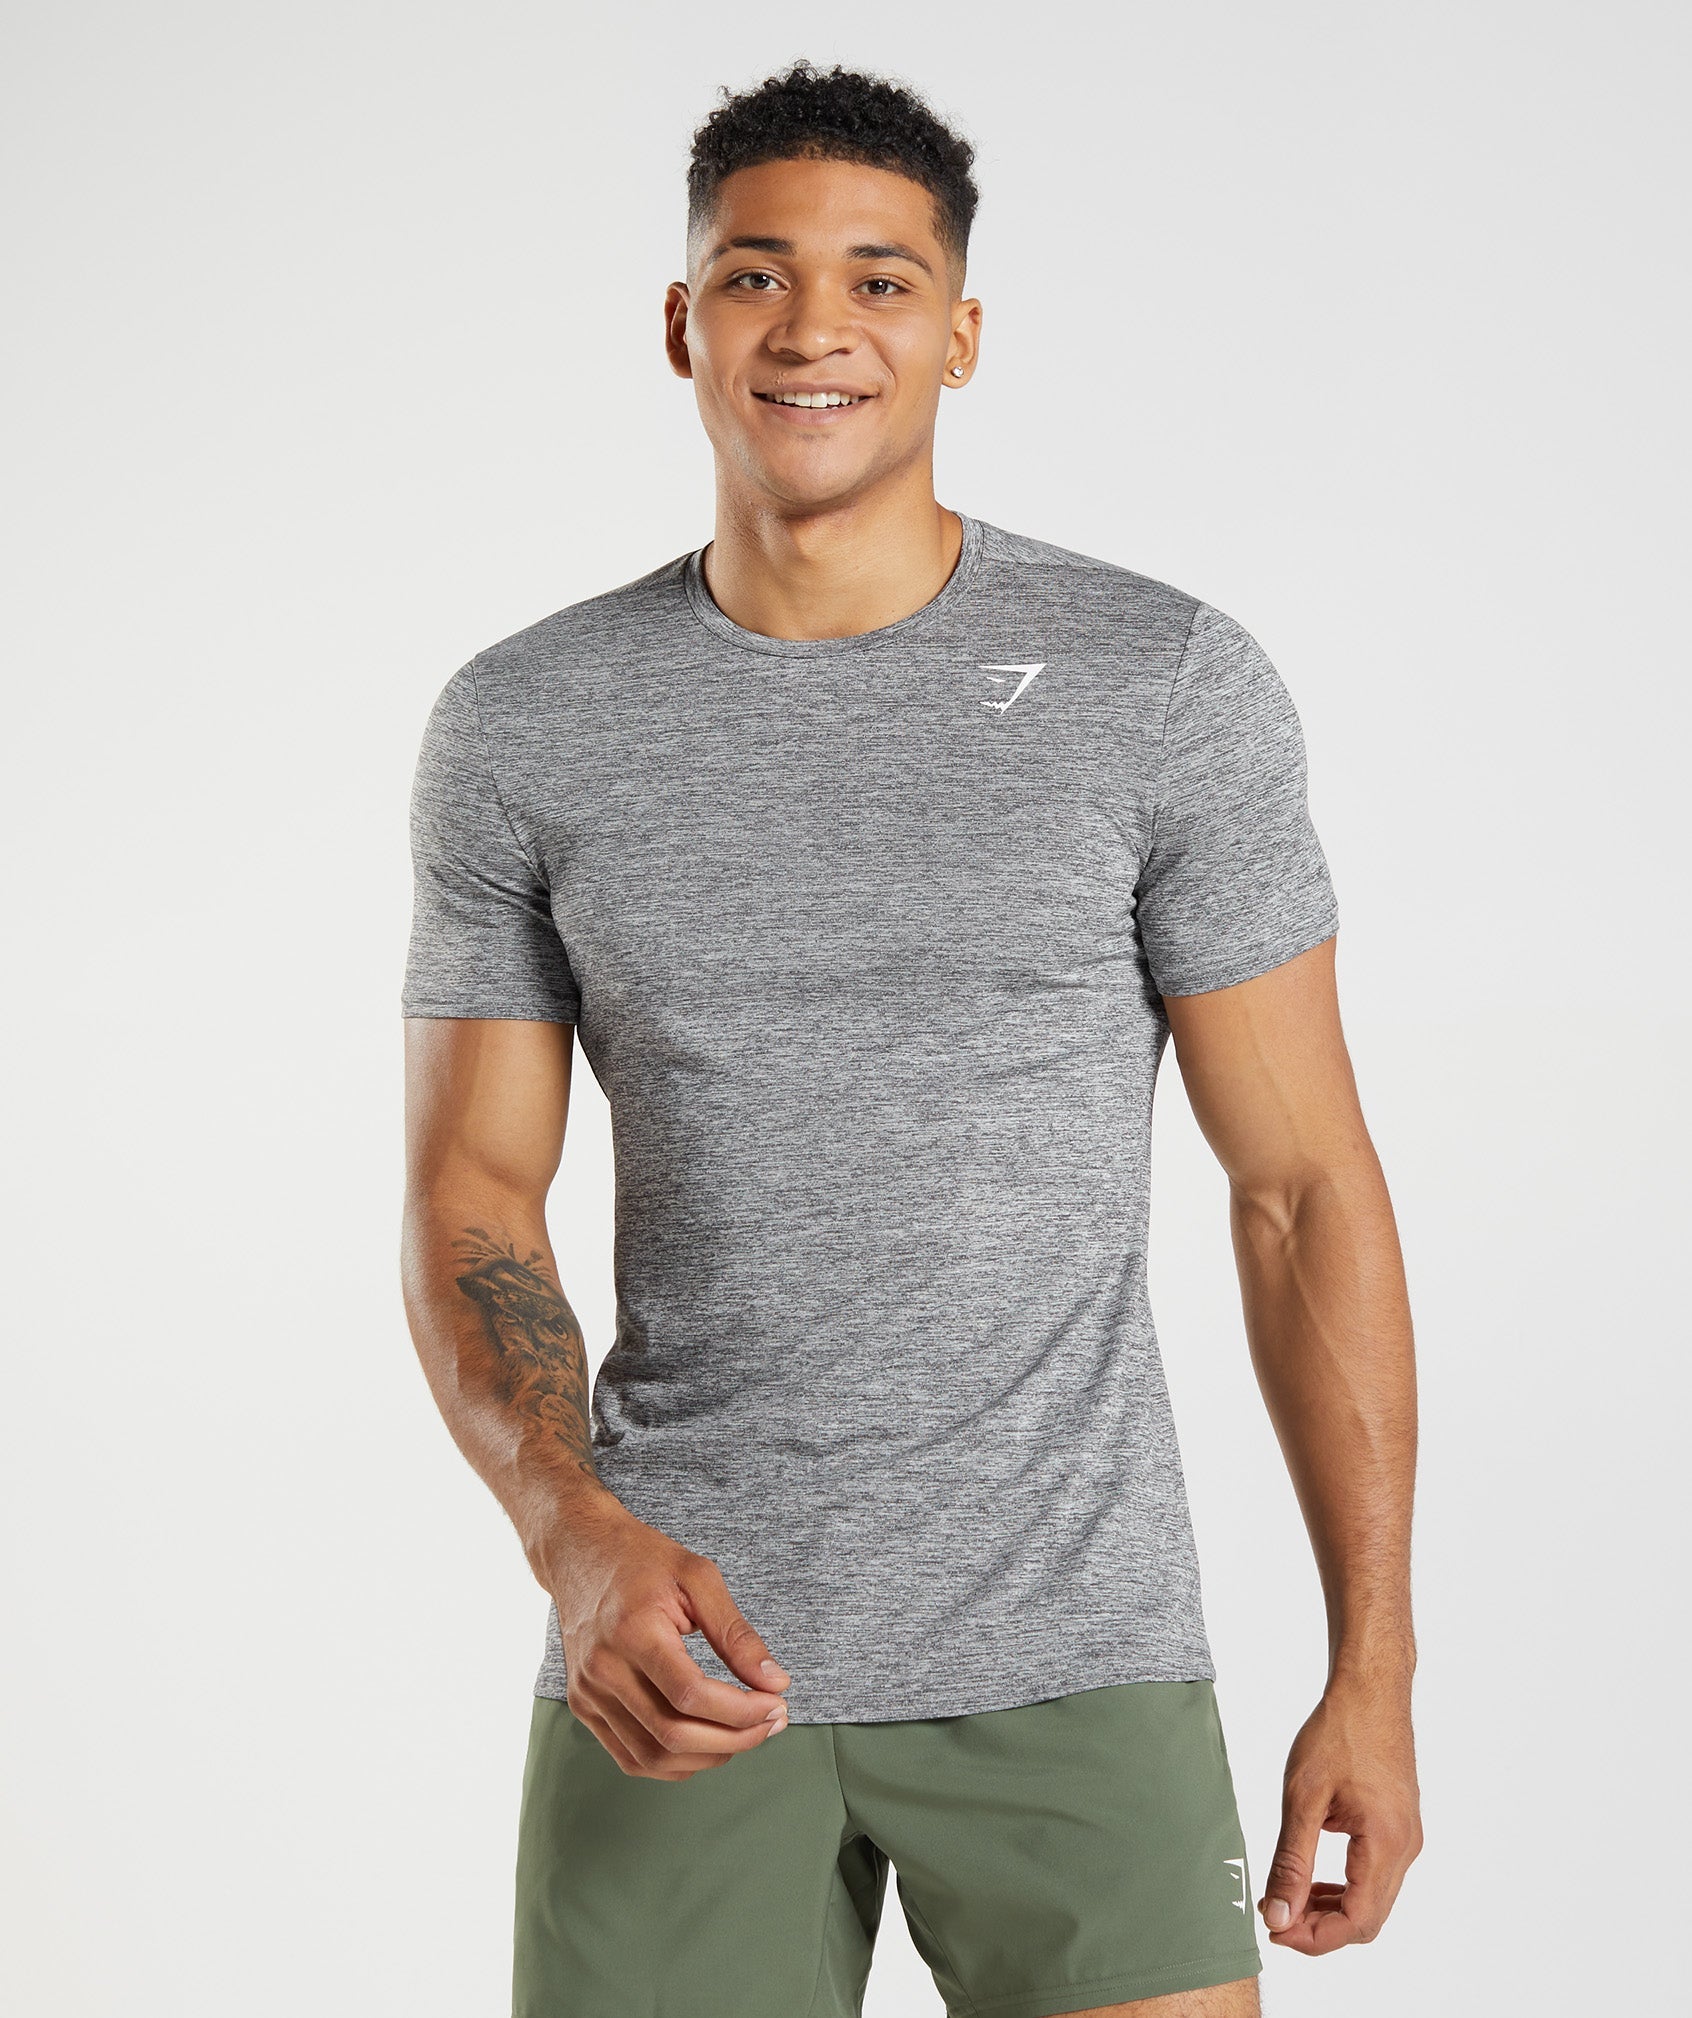 Arrival Marl T-Shirt in Silhouette Grey/Light Grey Marl is out of stock